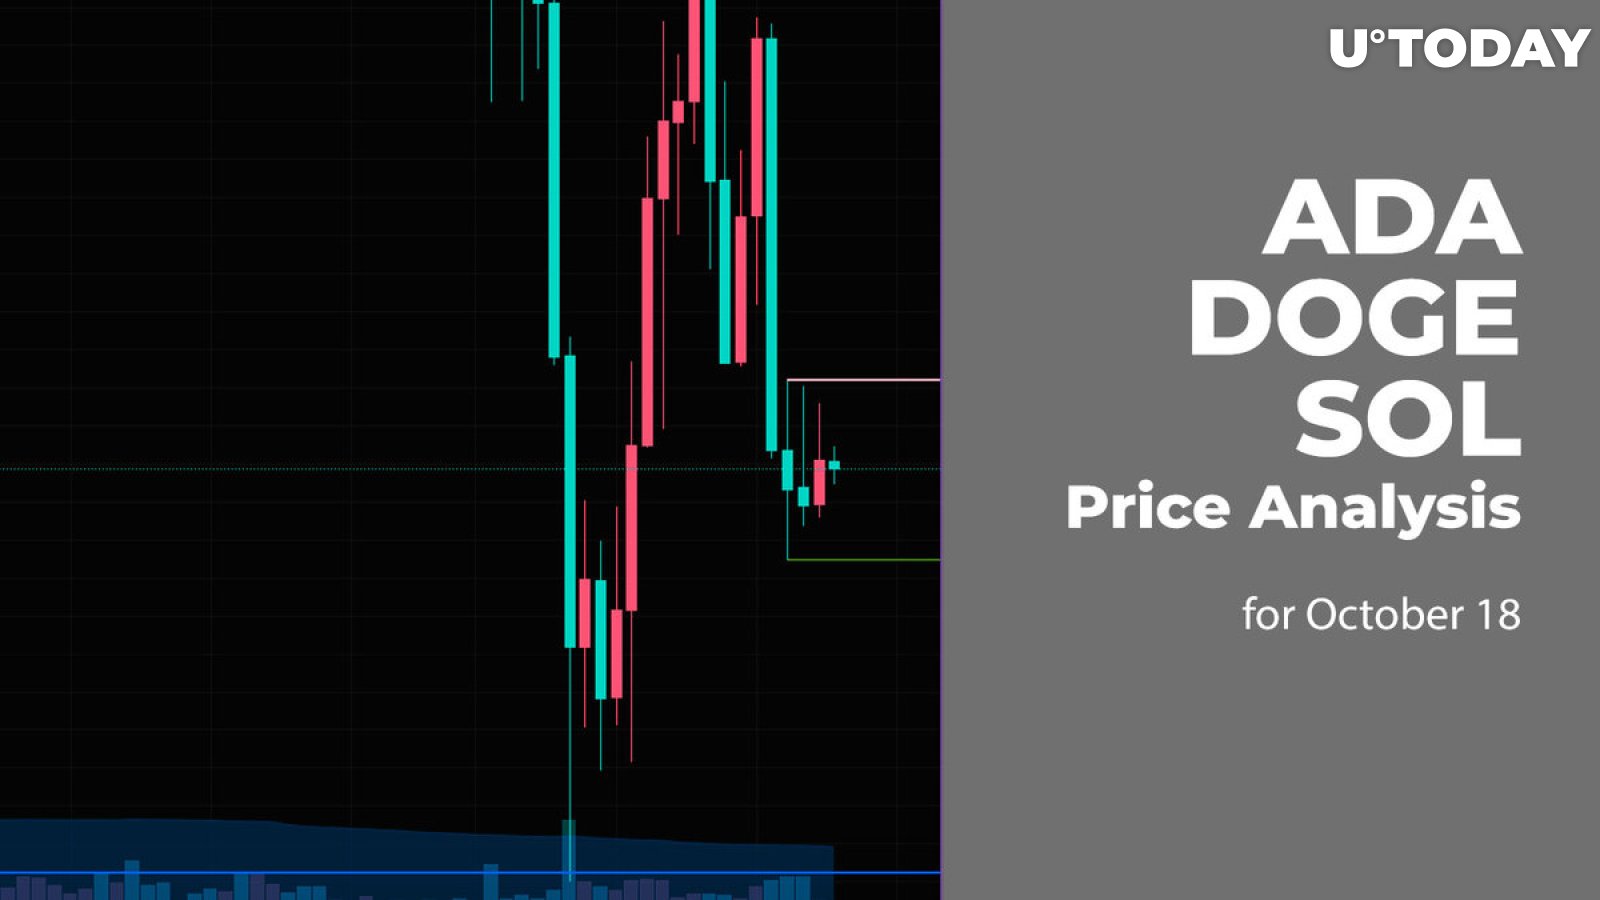 ADA, DOGE and SOL Price Analysis for October 18